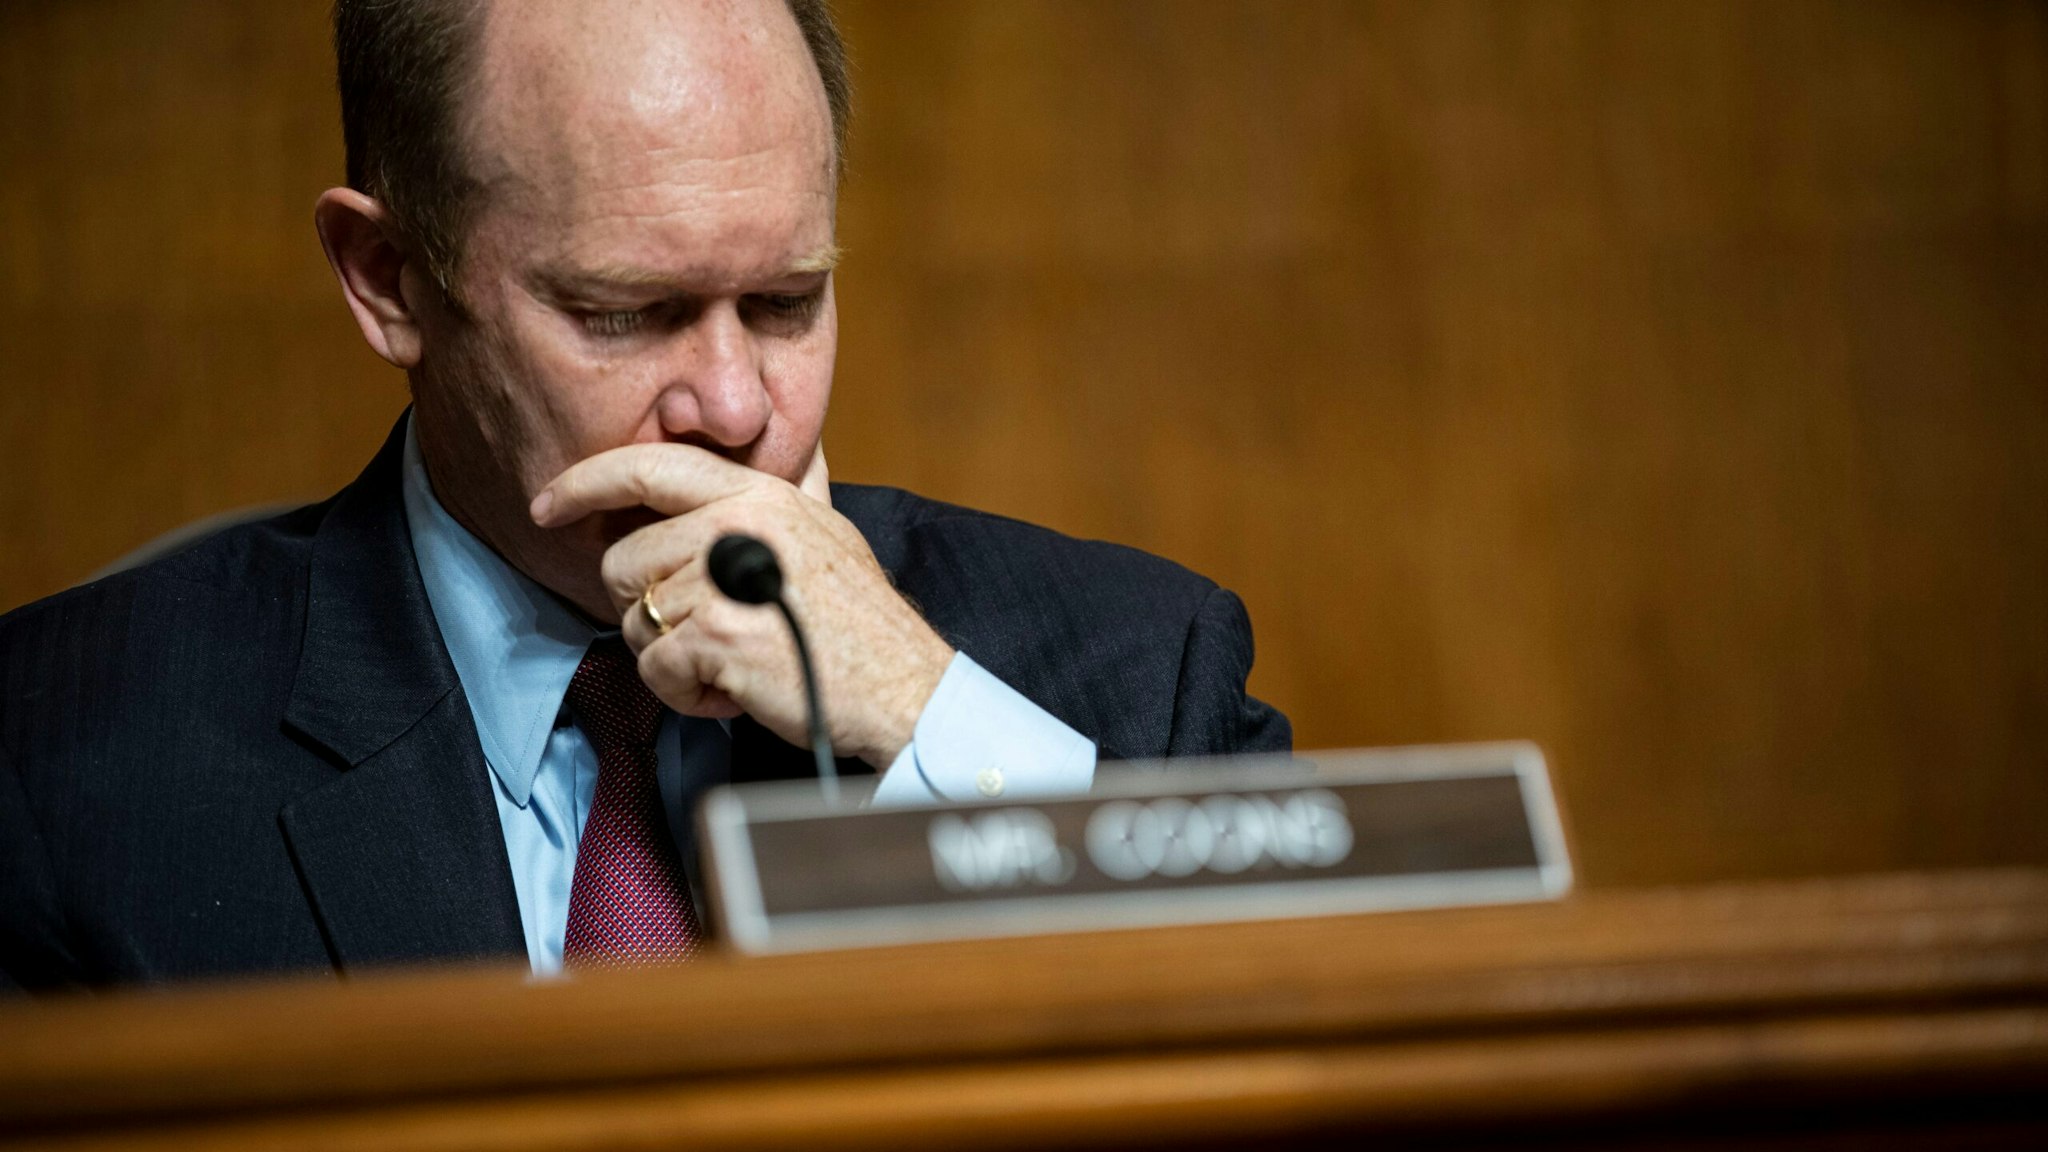 WASHINGTON, DC - APRIL 27: Chairman Senator Chris Coons (D-DE) attends a Senate Judiciary Subcommittee on Privacy, Technology, and the Law hearing April 27, 2021 on Capitol Hill in Washington, D.C. The committee is hearing testimony on the effect social media companies' algorithms and design choices have on users and discourse.